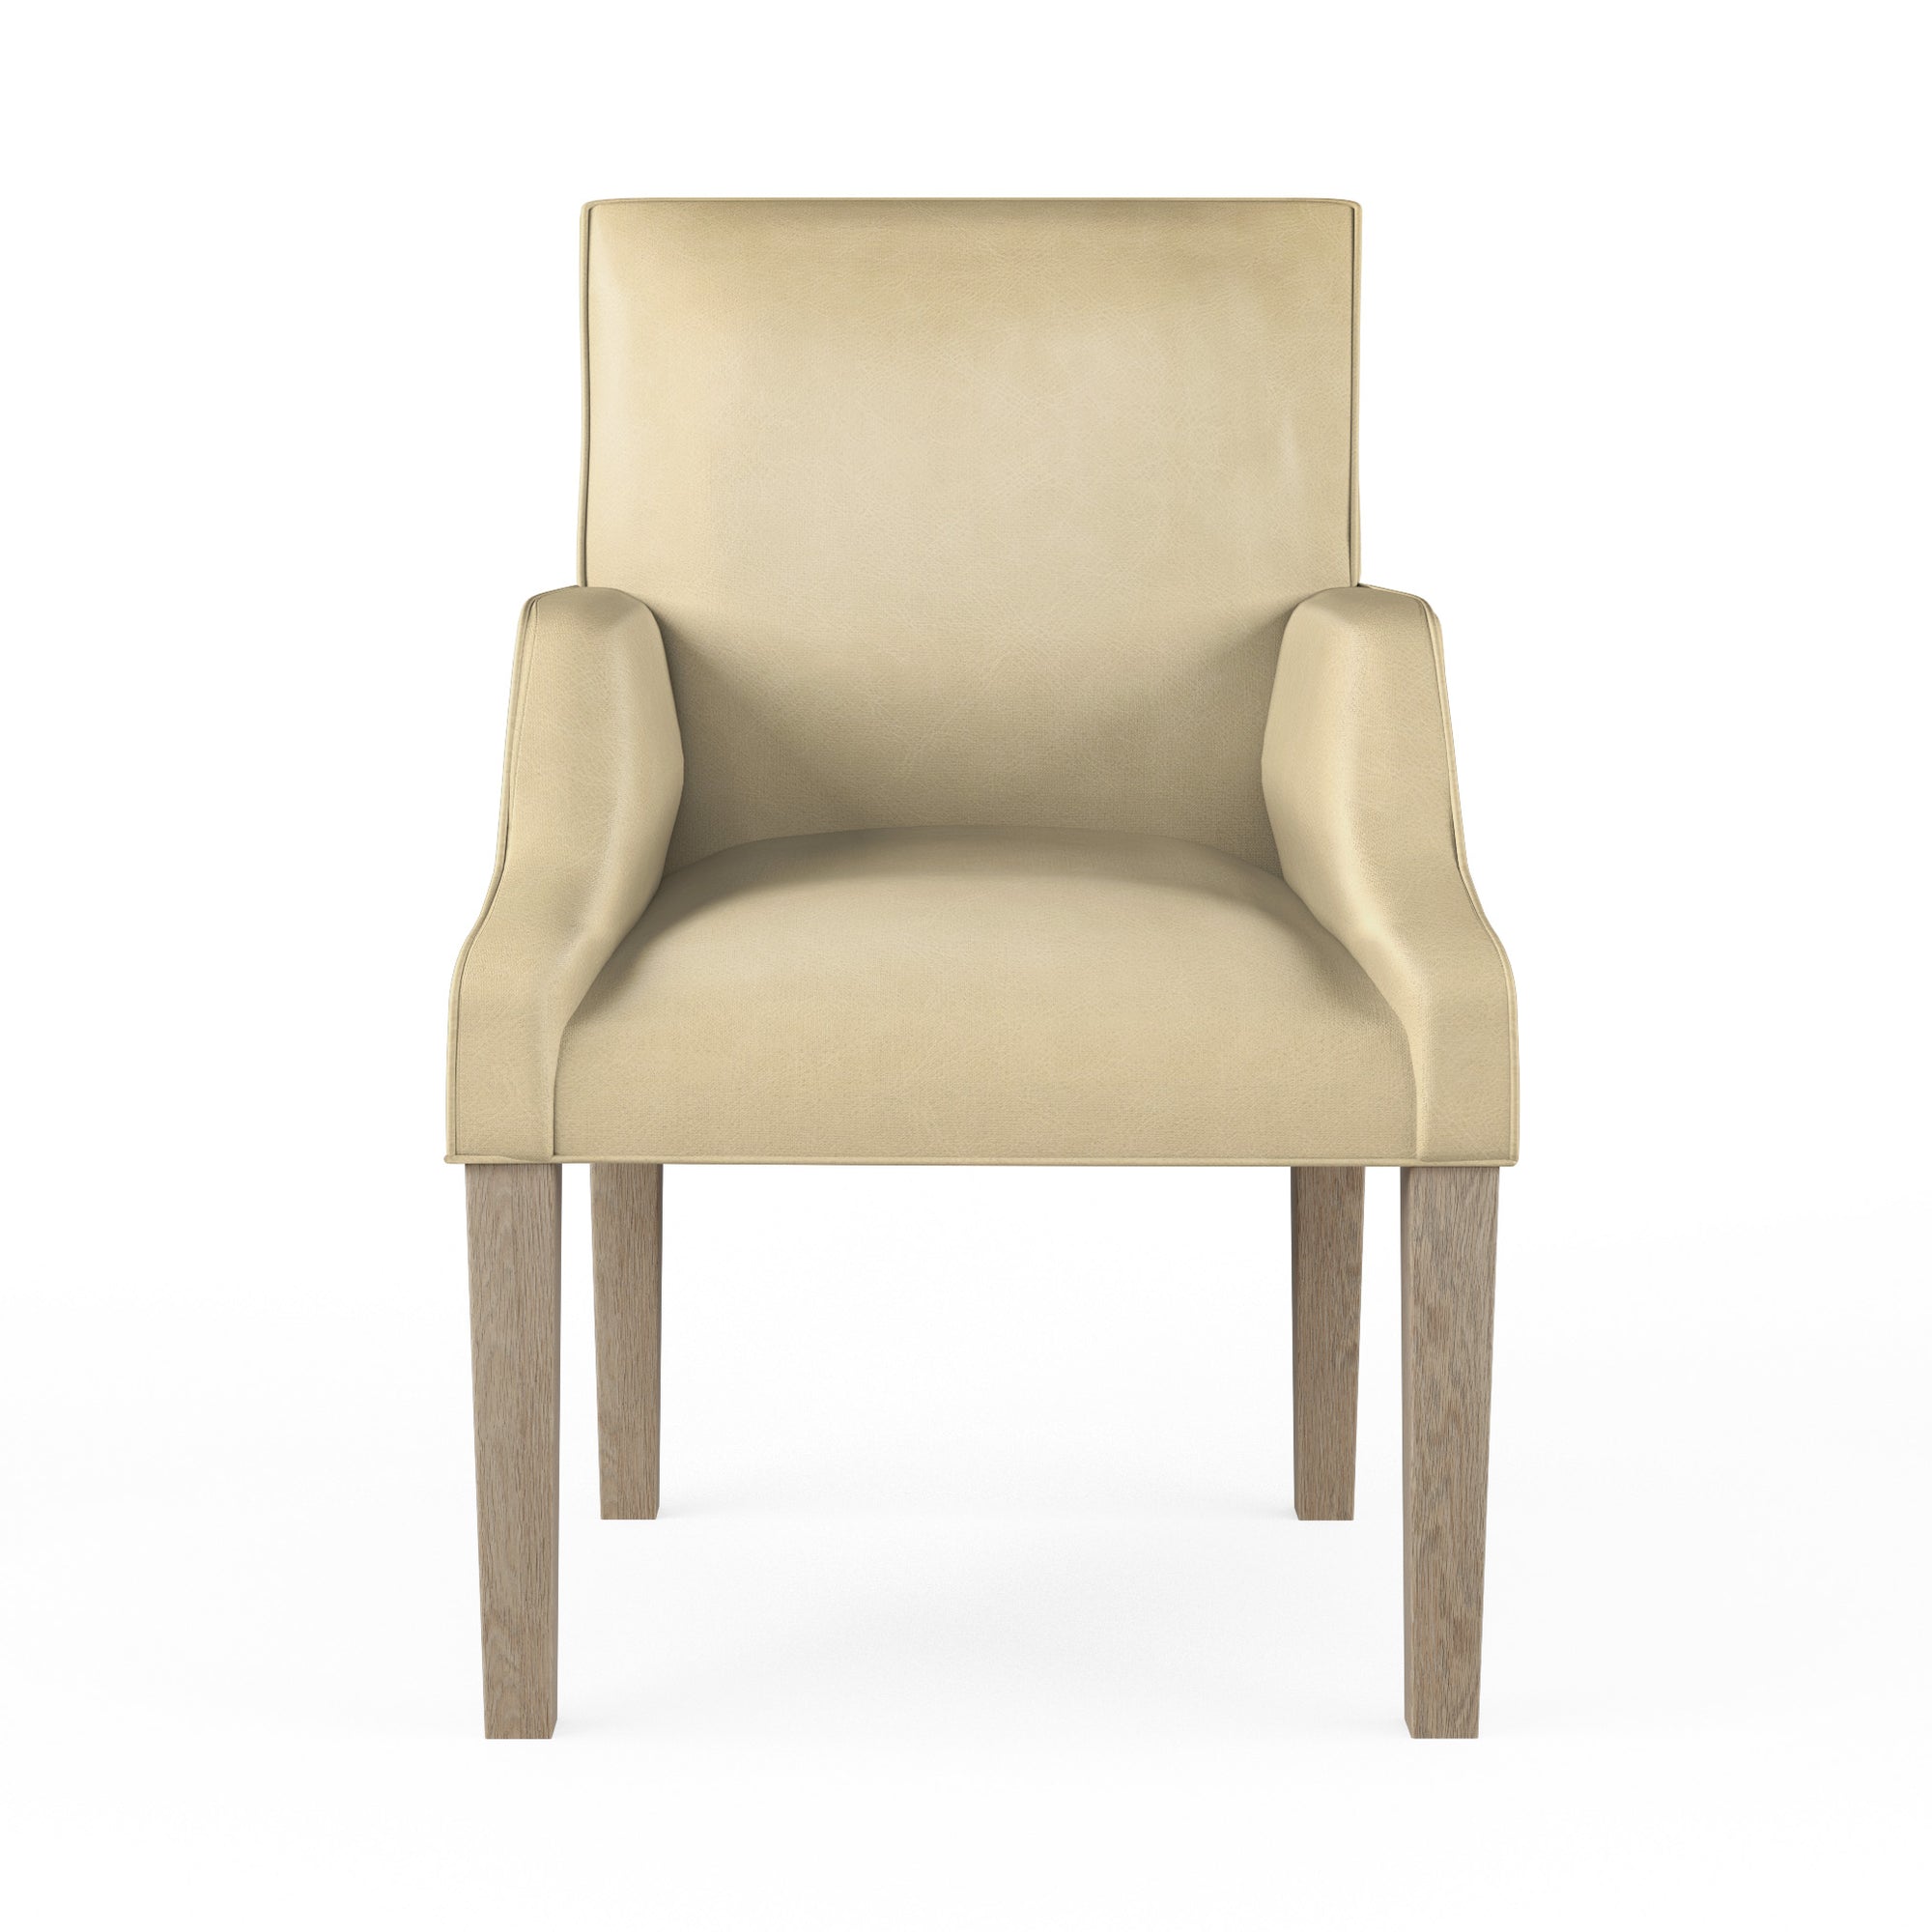 Juliet Dining Chair - Oyster Vintage Leather